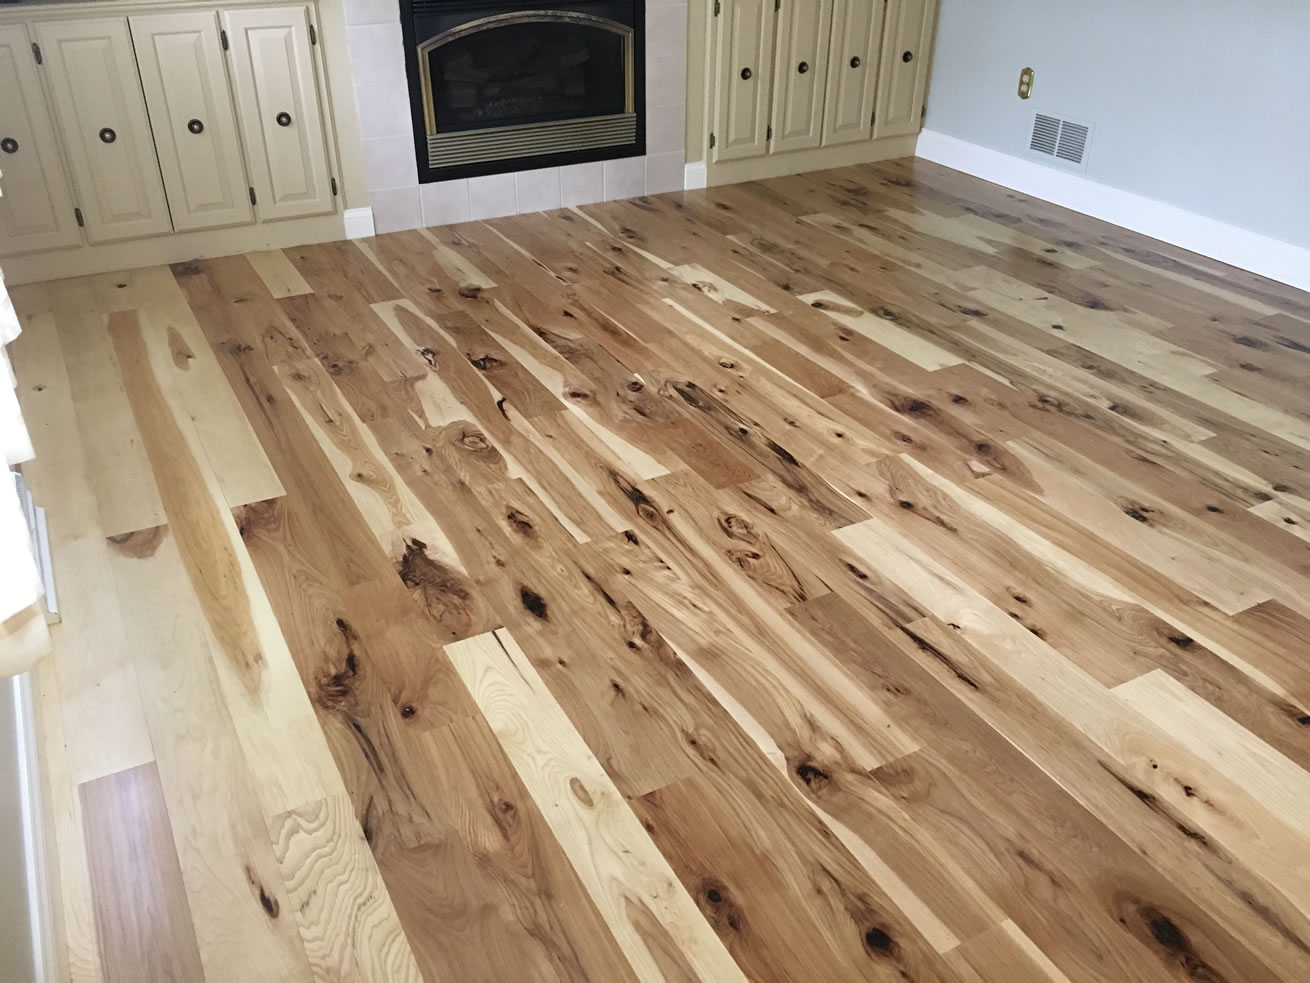 Rustic Hickory Flooring Finished Natural With Polyurethane2 R 